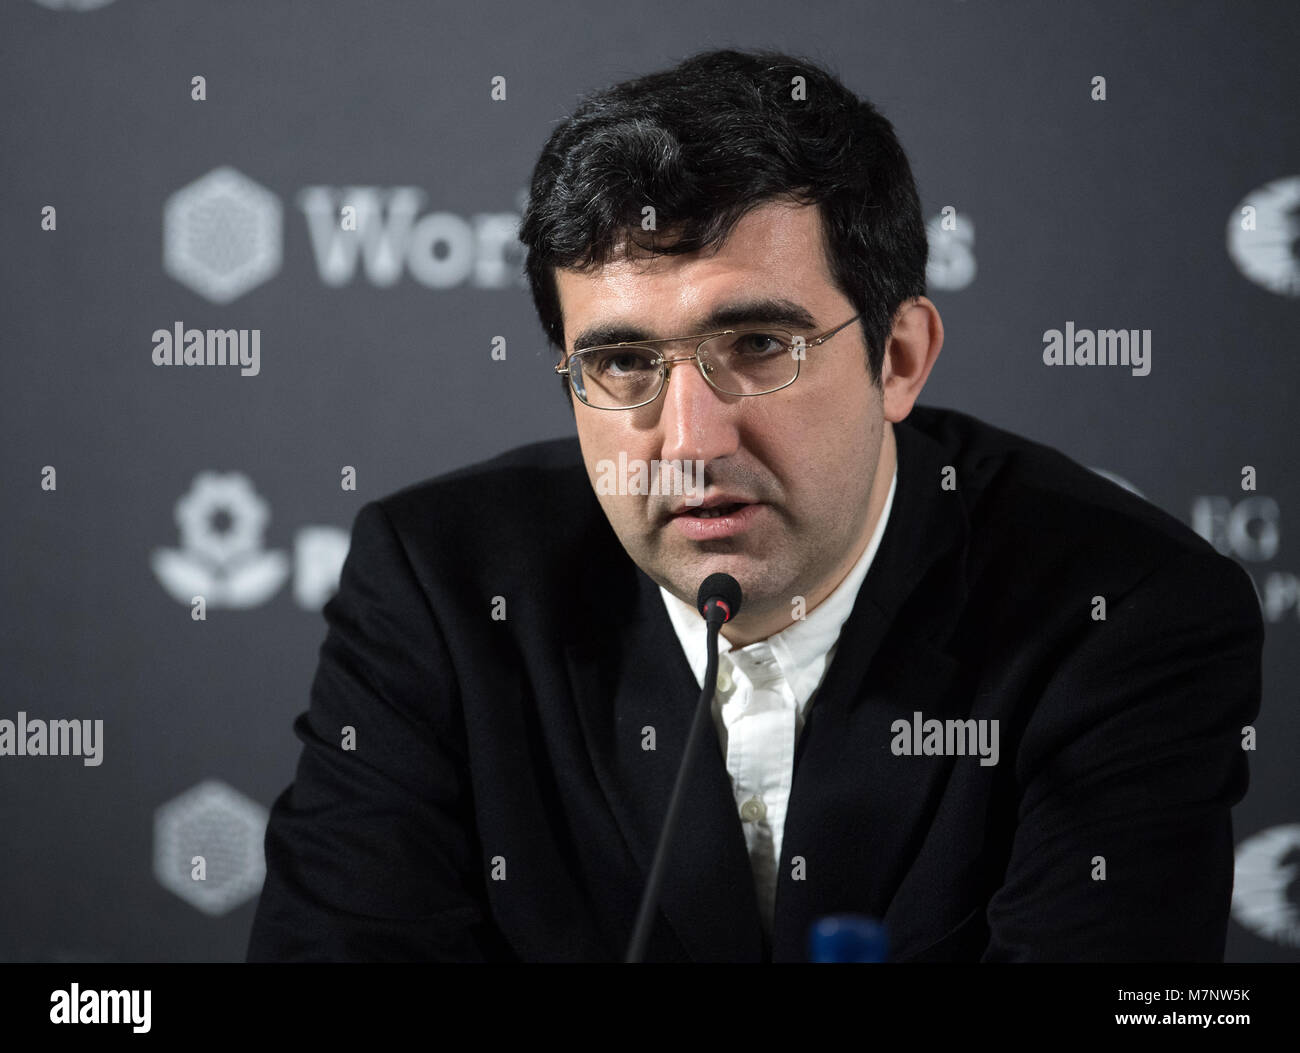 Candidates Tournament opens as Kramnik says it should have been